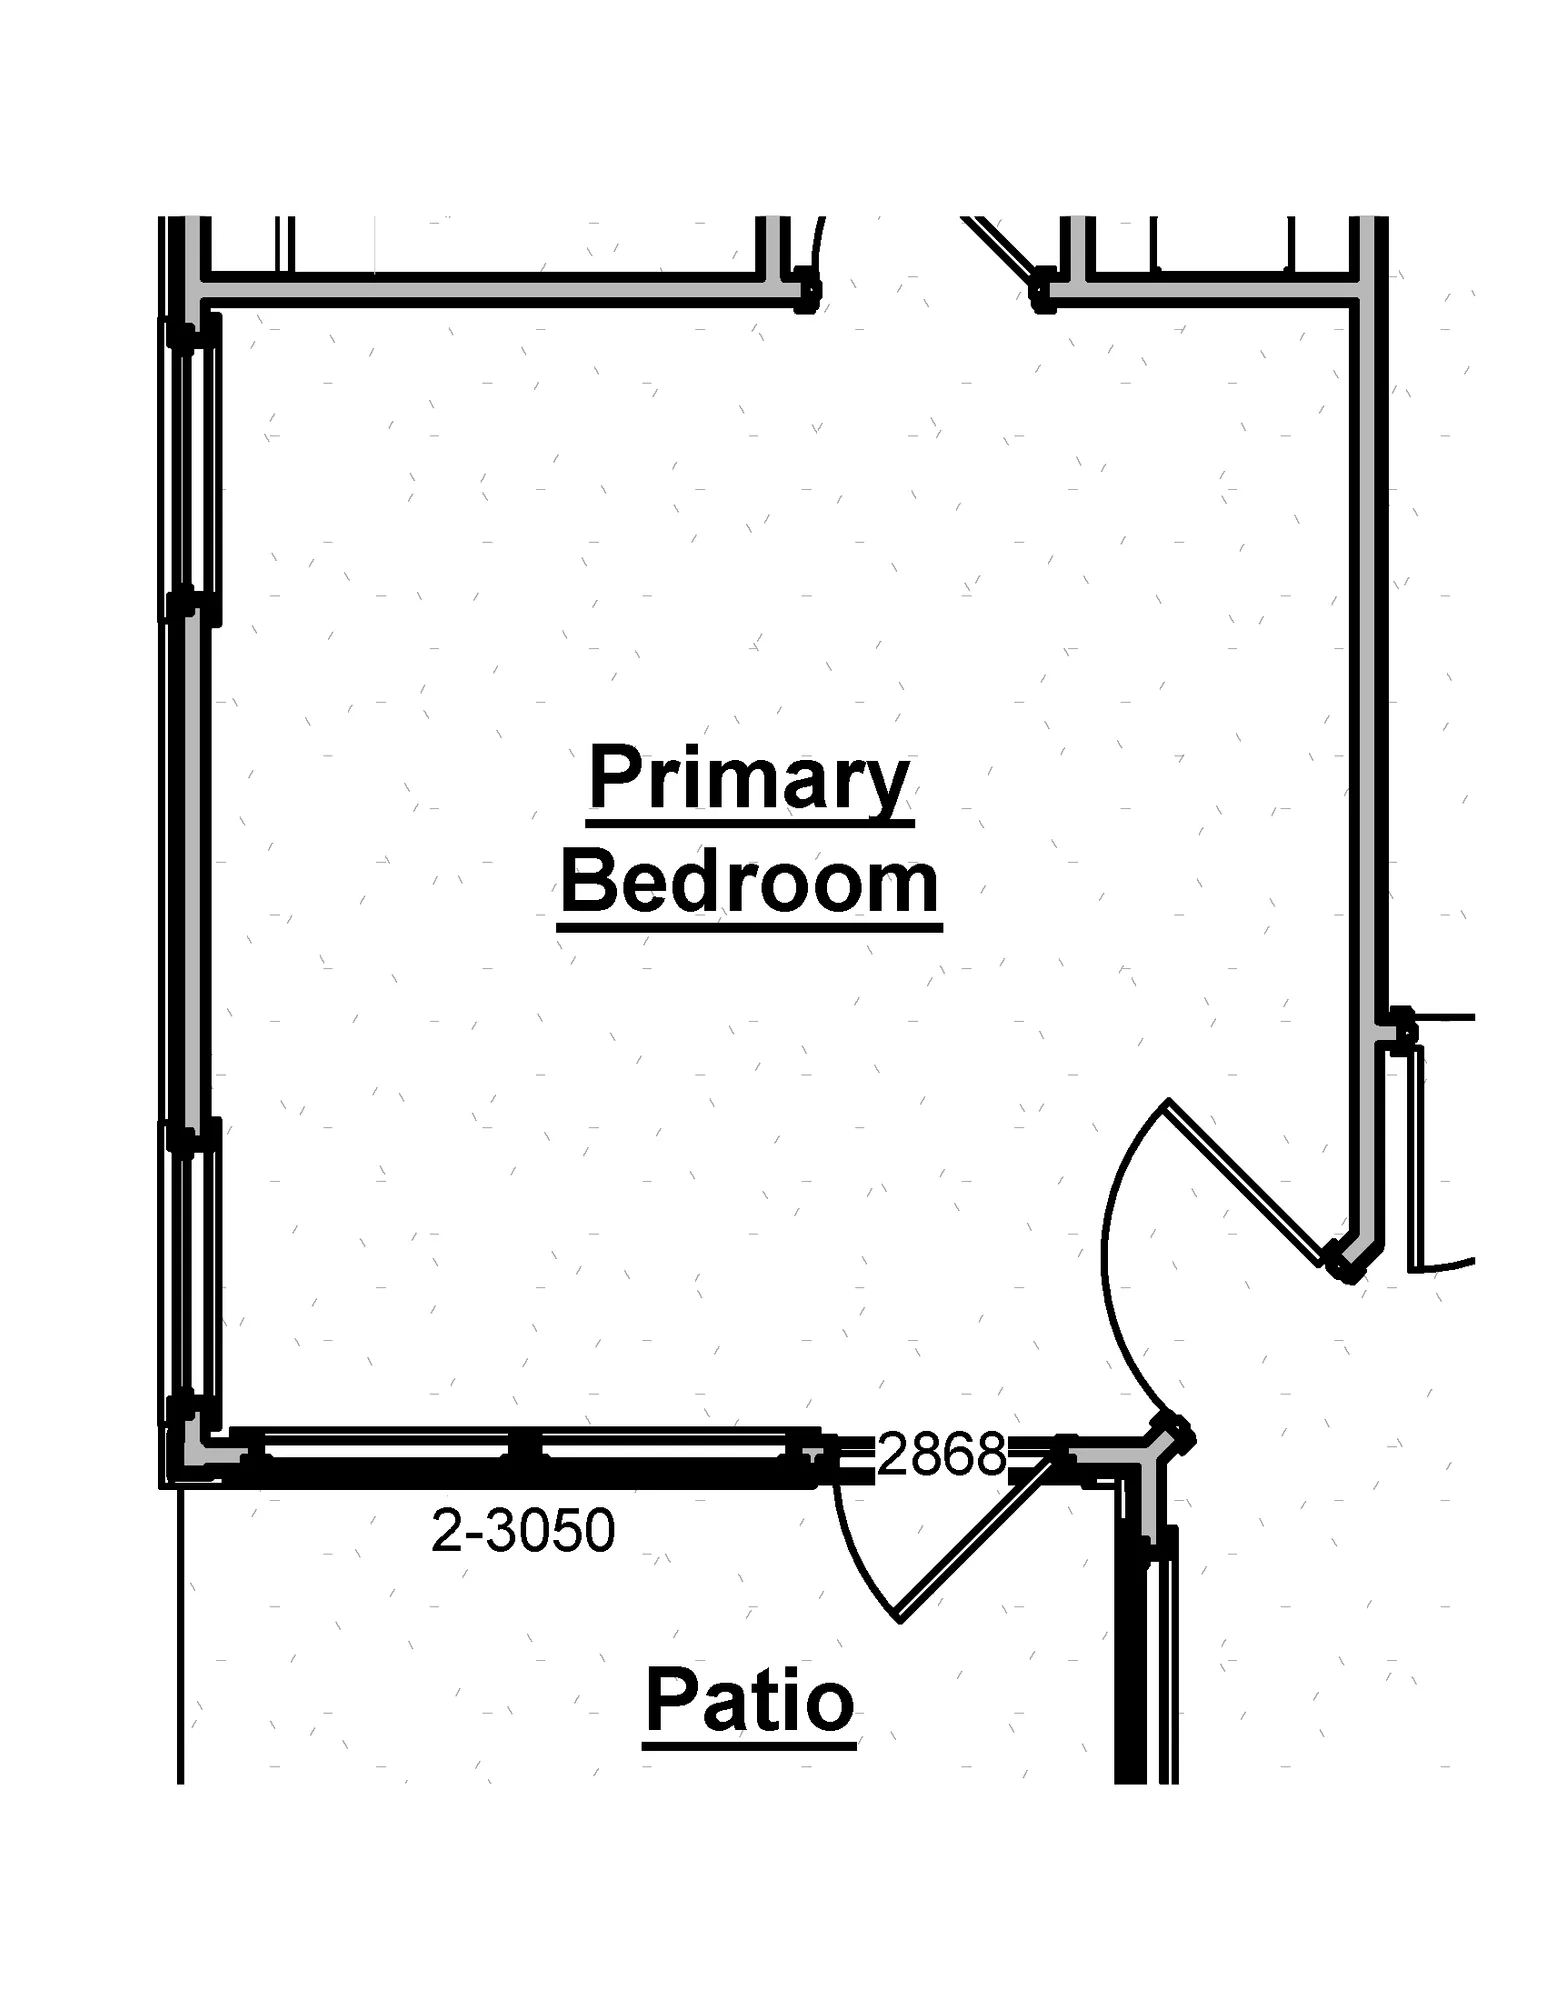 Primary Bedroom Patio Access - undefined